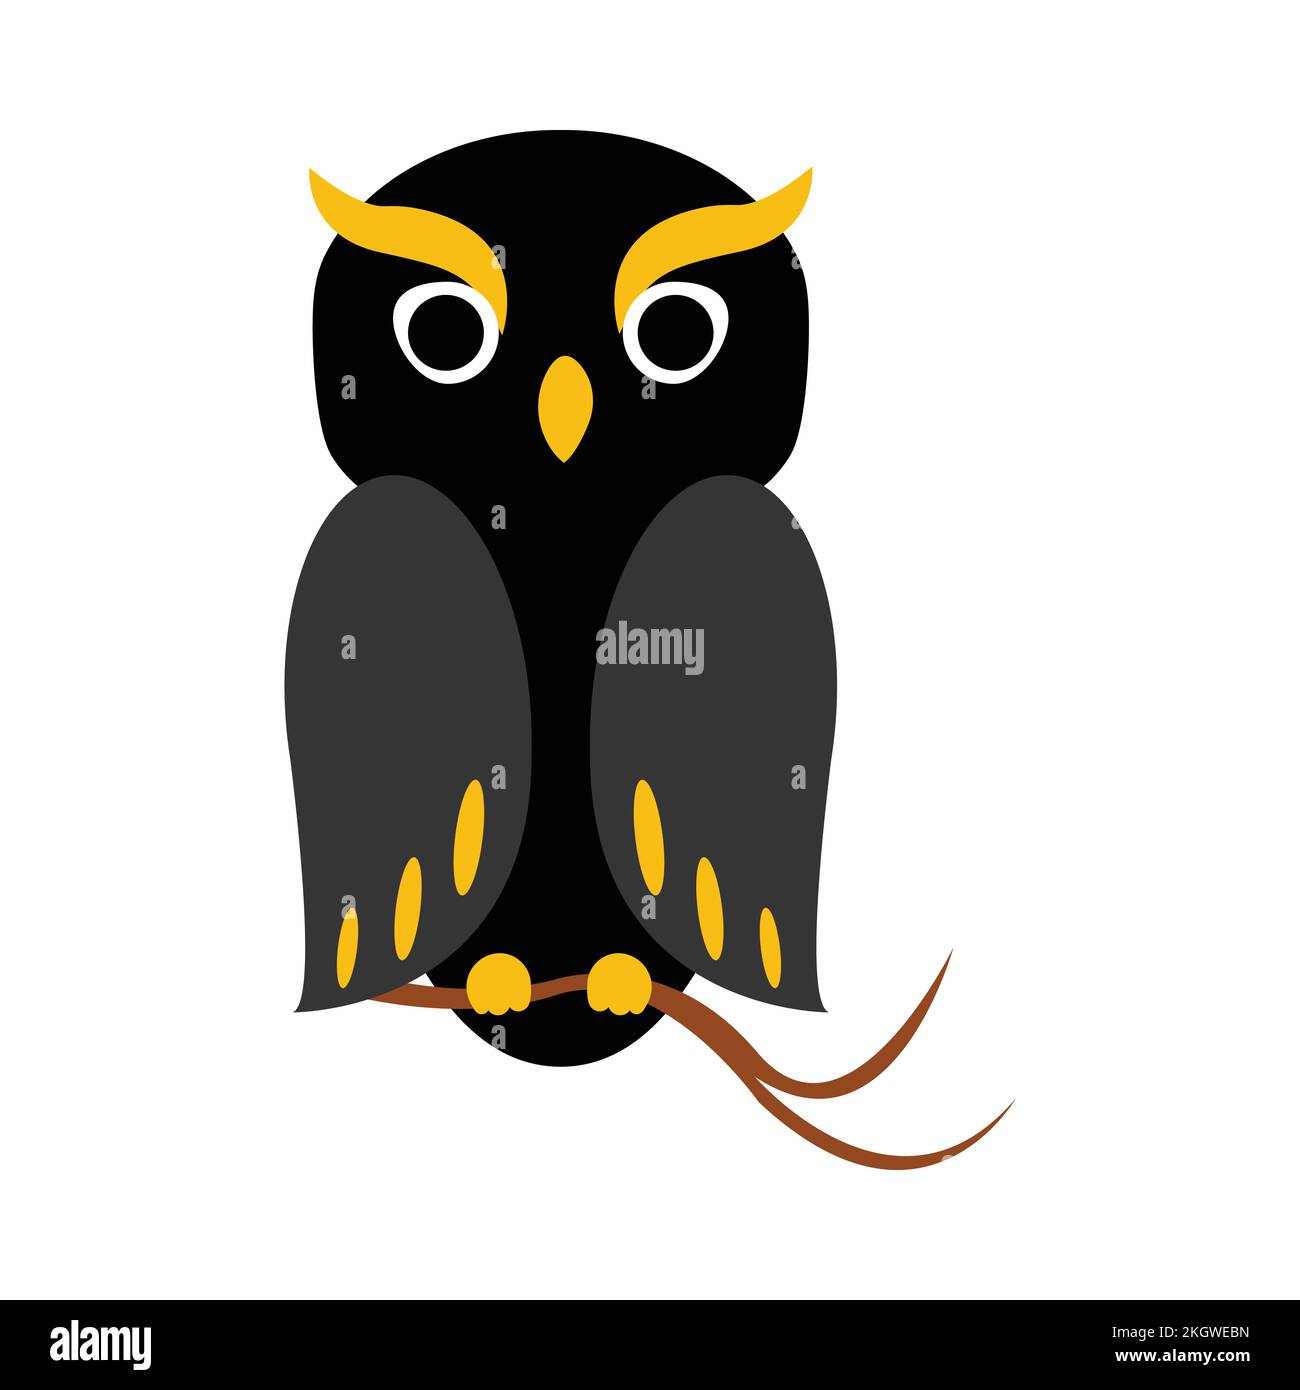 Halloween scary owl with dark black and yellow color shade. Halloween black owl design on a white background. Spooky design for Halloween event vector Stock Vector